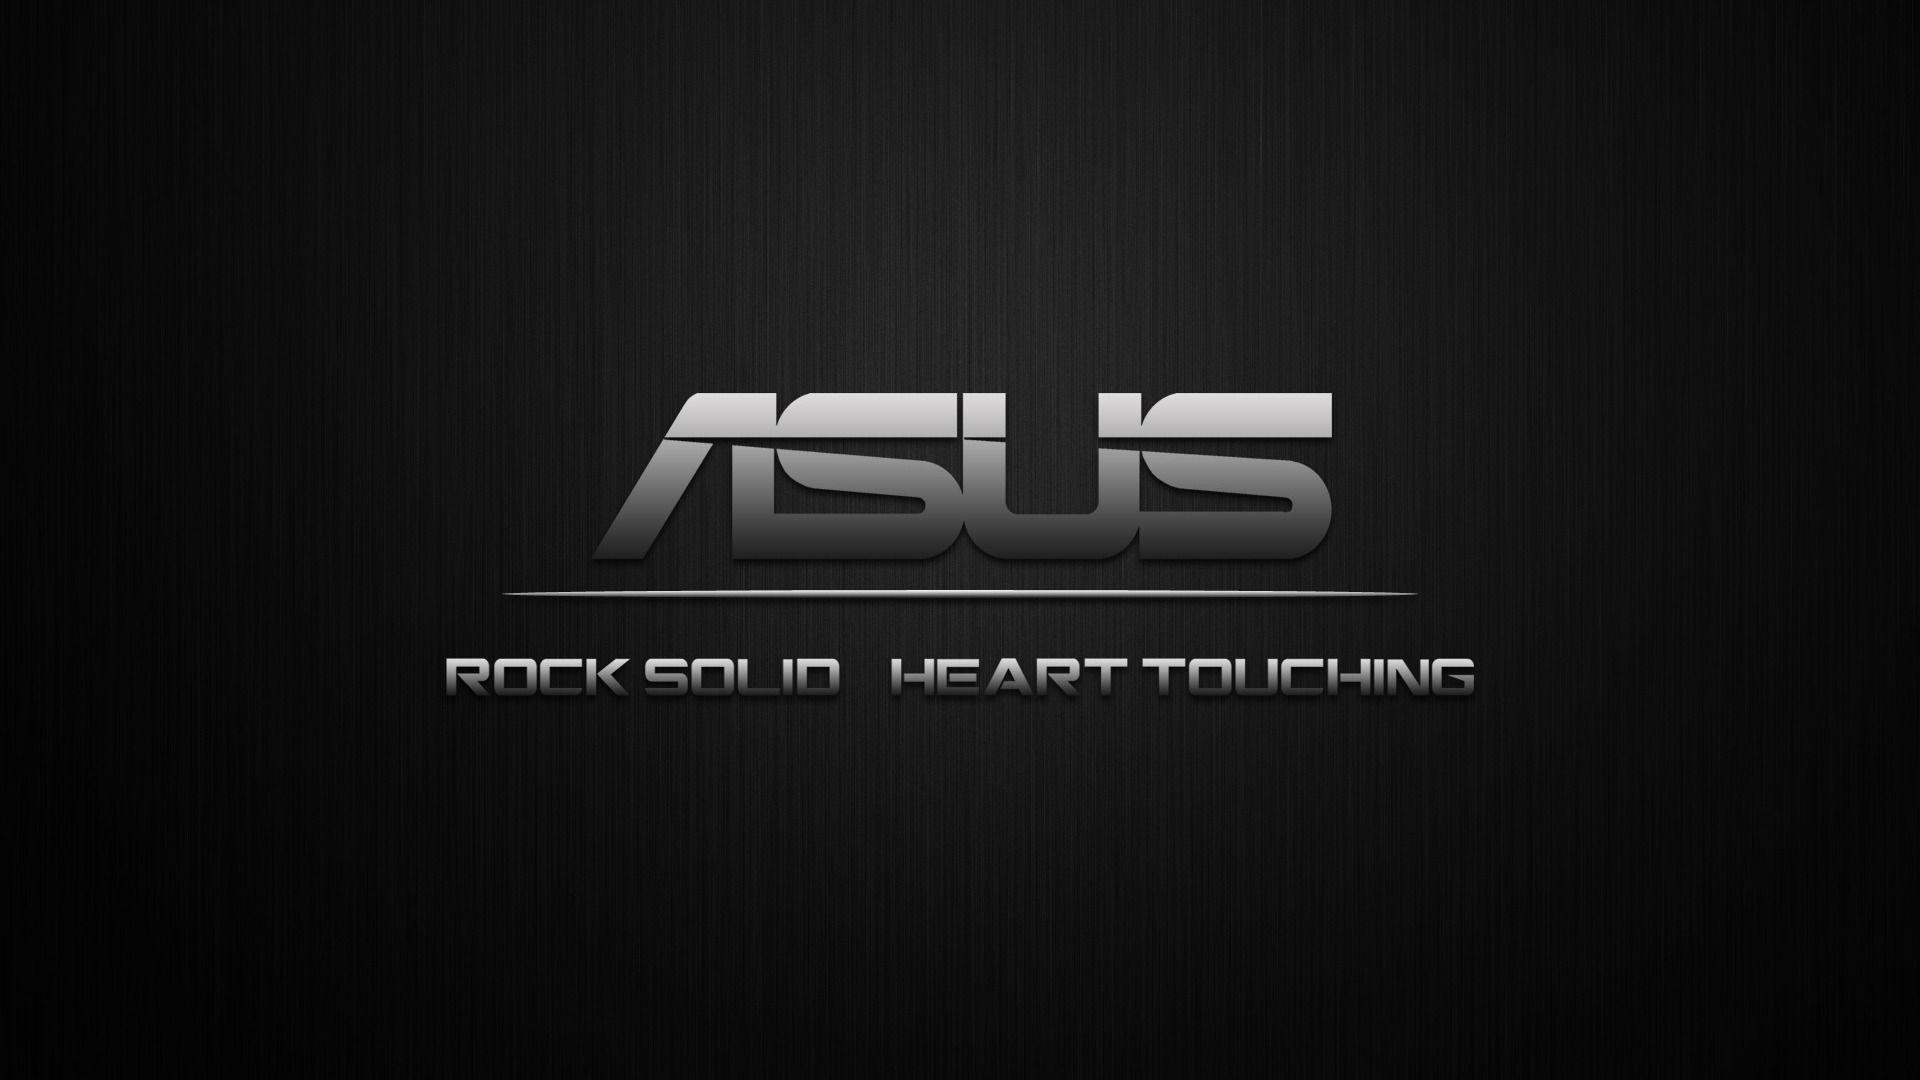 ASUS rock solid, heart touching Wallpaper